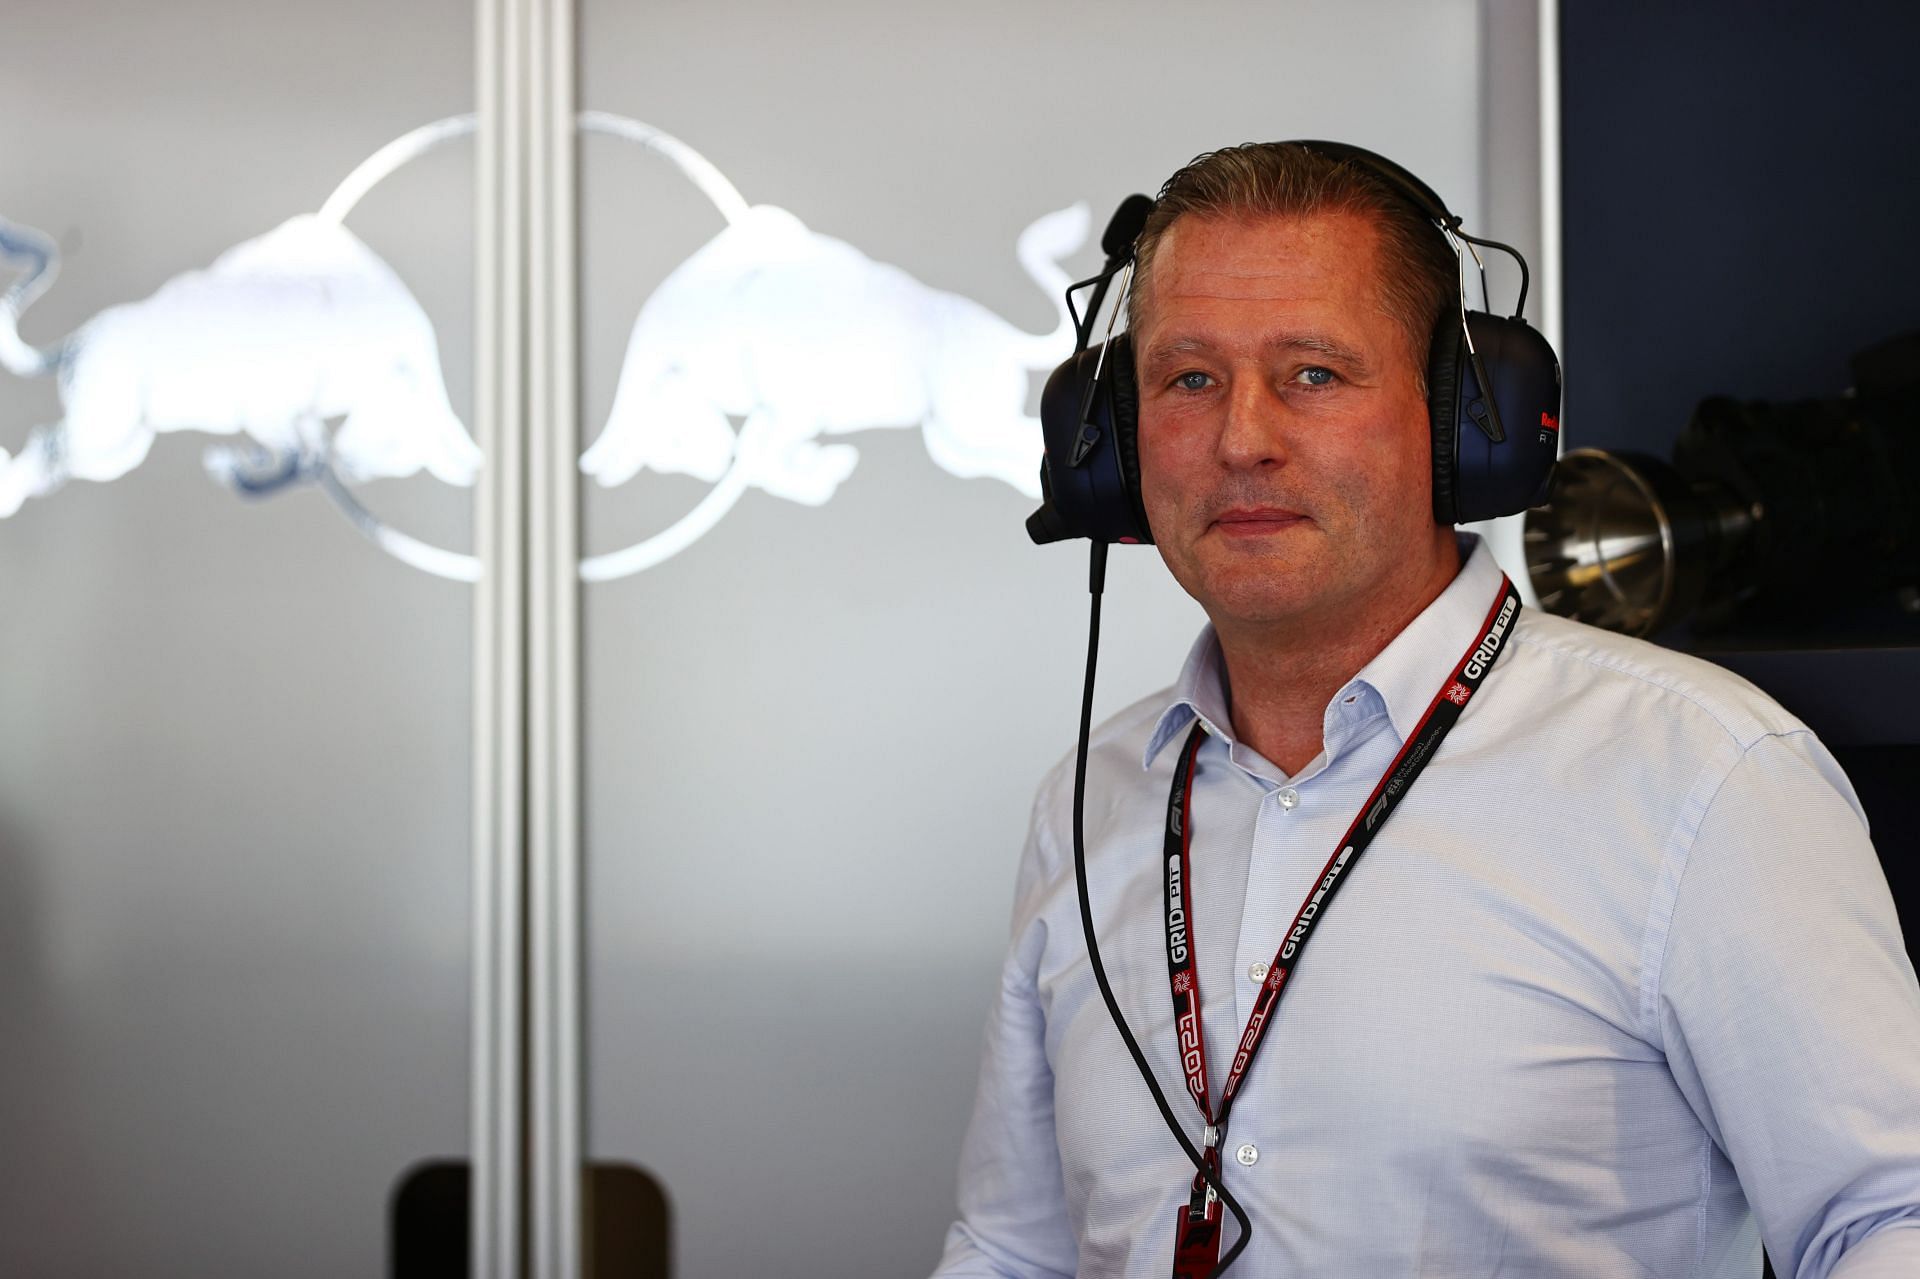 Jos Verstappen said he barely has any verbal contact with Lewis Hamilton in the paddock . (Photo by Mark Thompson/Getty Images)